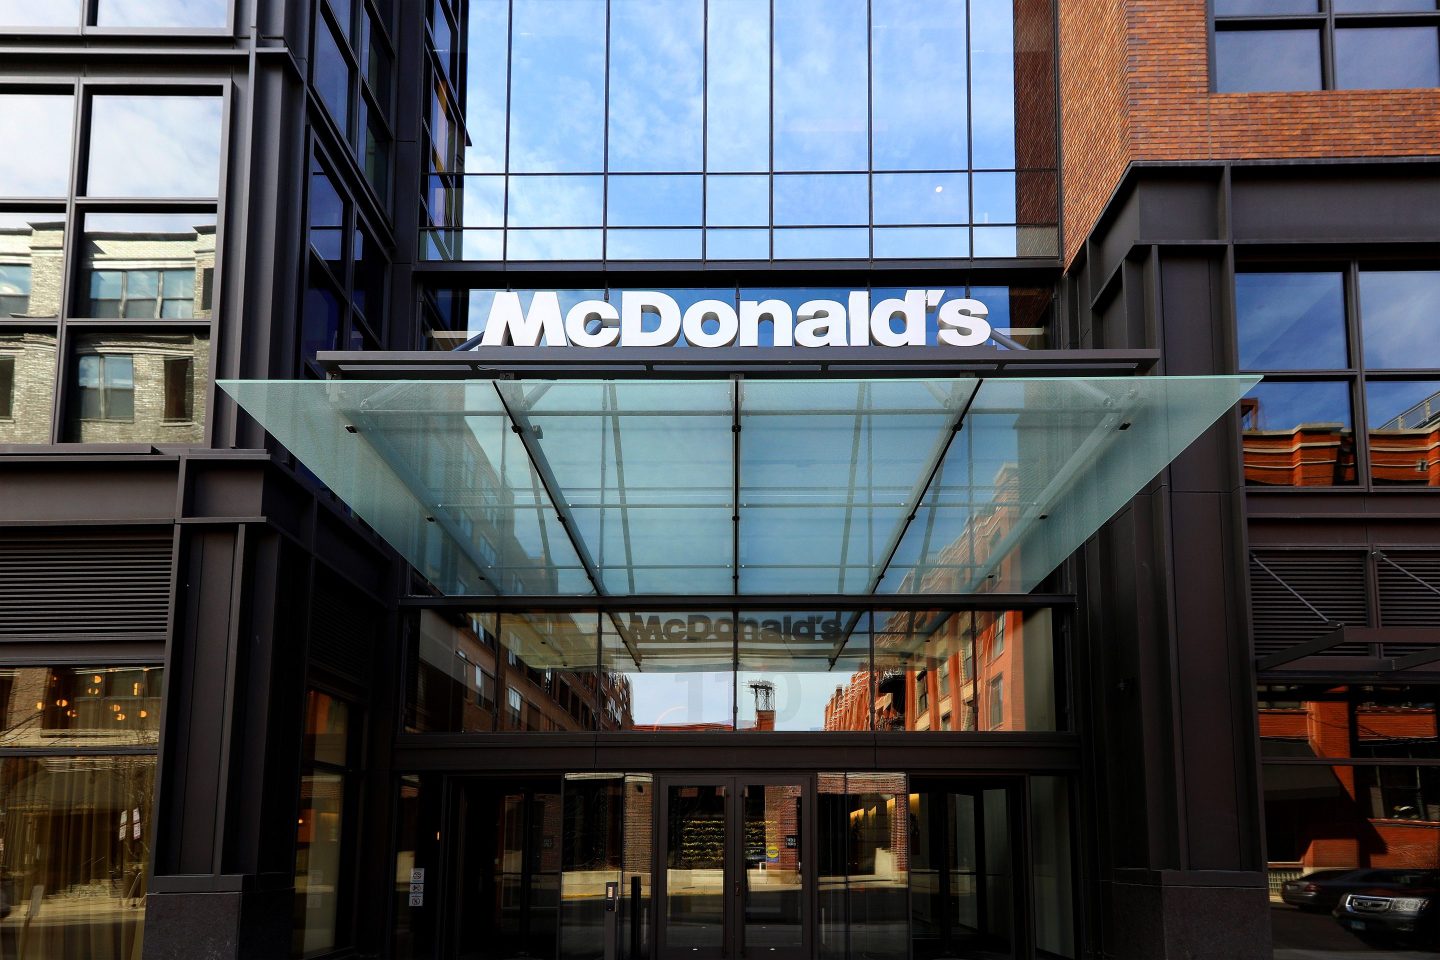 Marketing is "one of the most important growth investments we make" says McDonald's global CFO Ian Borden.